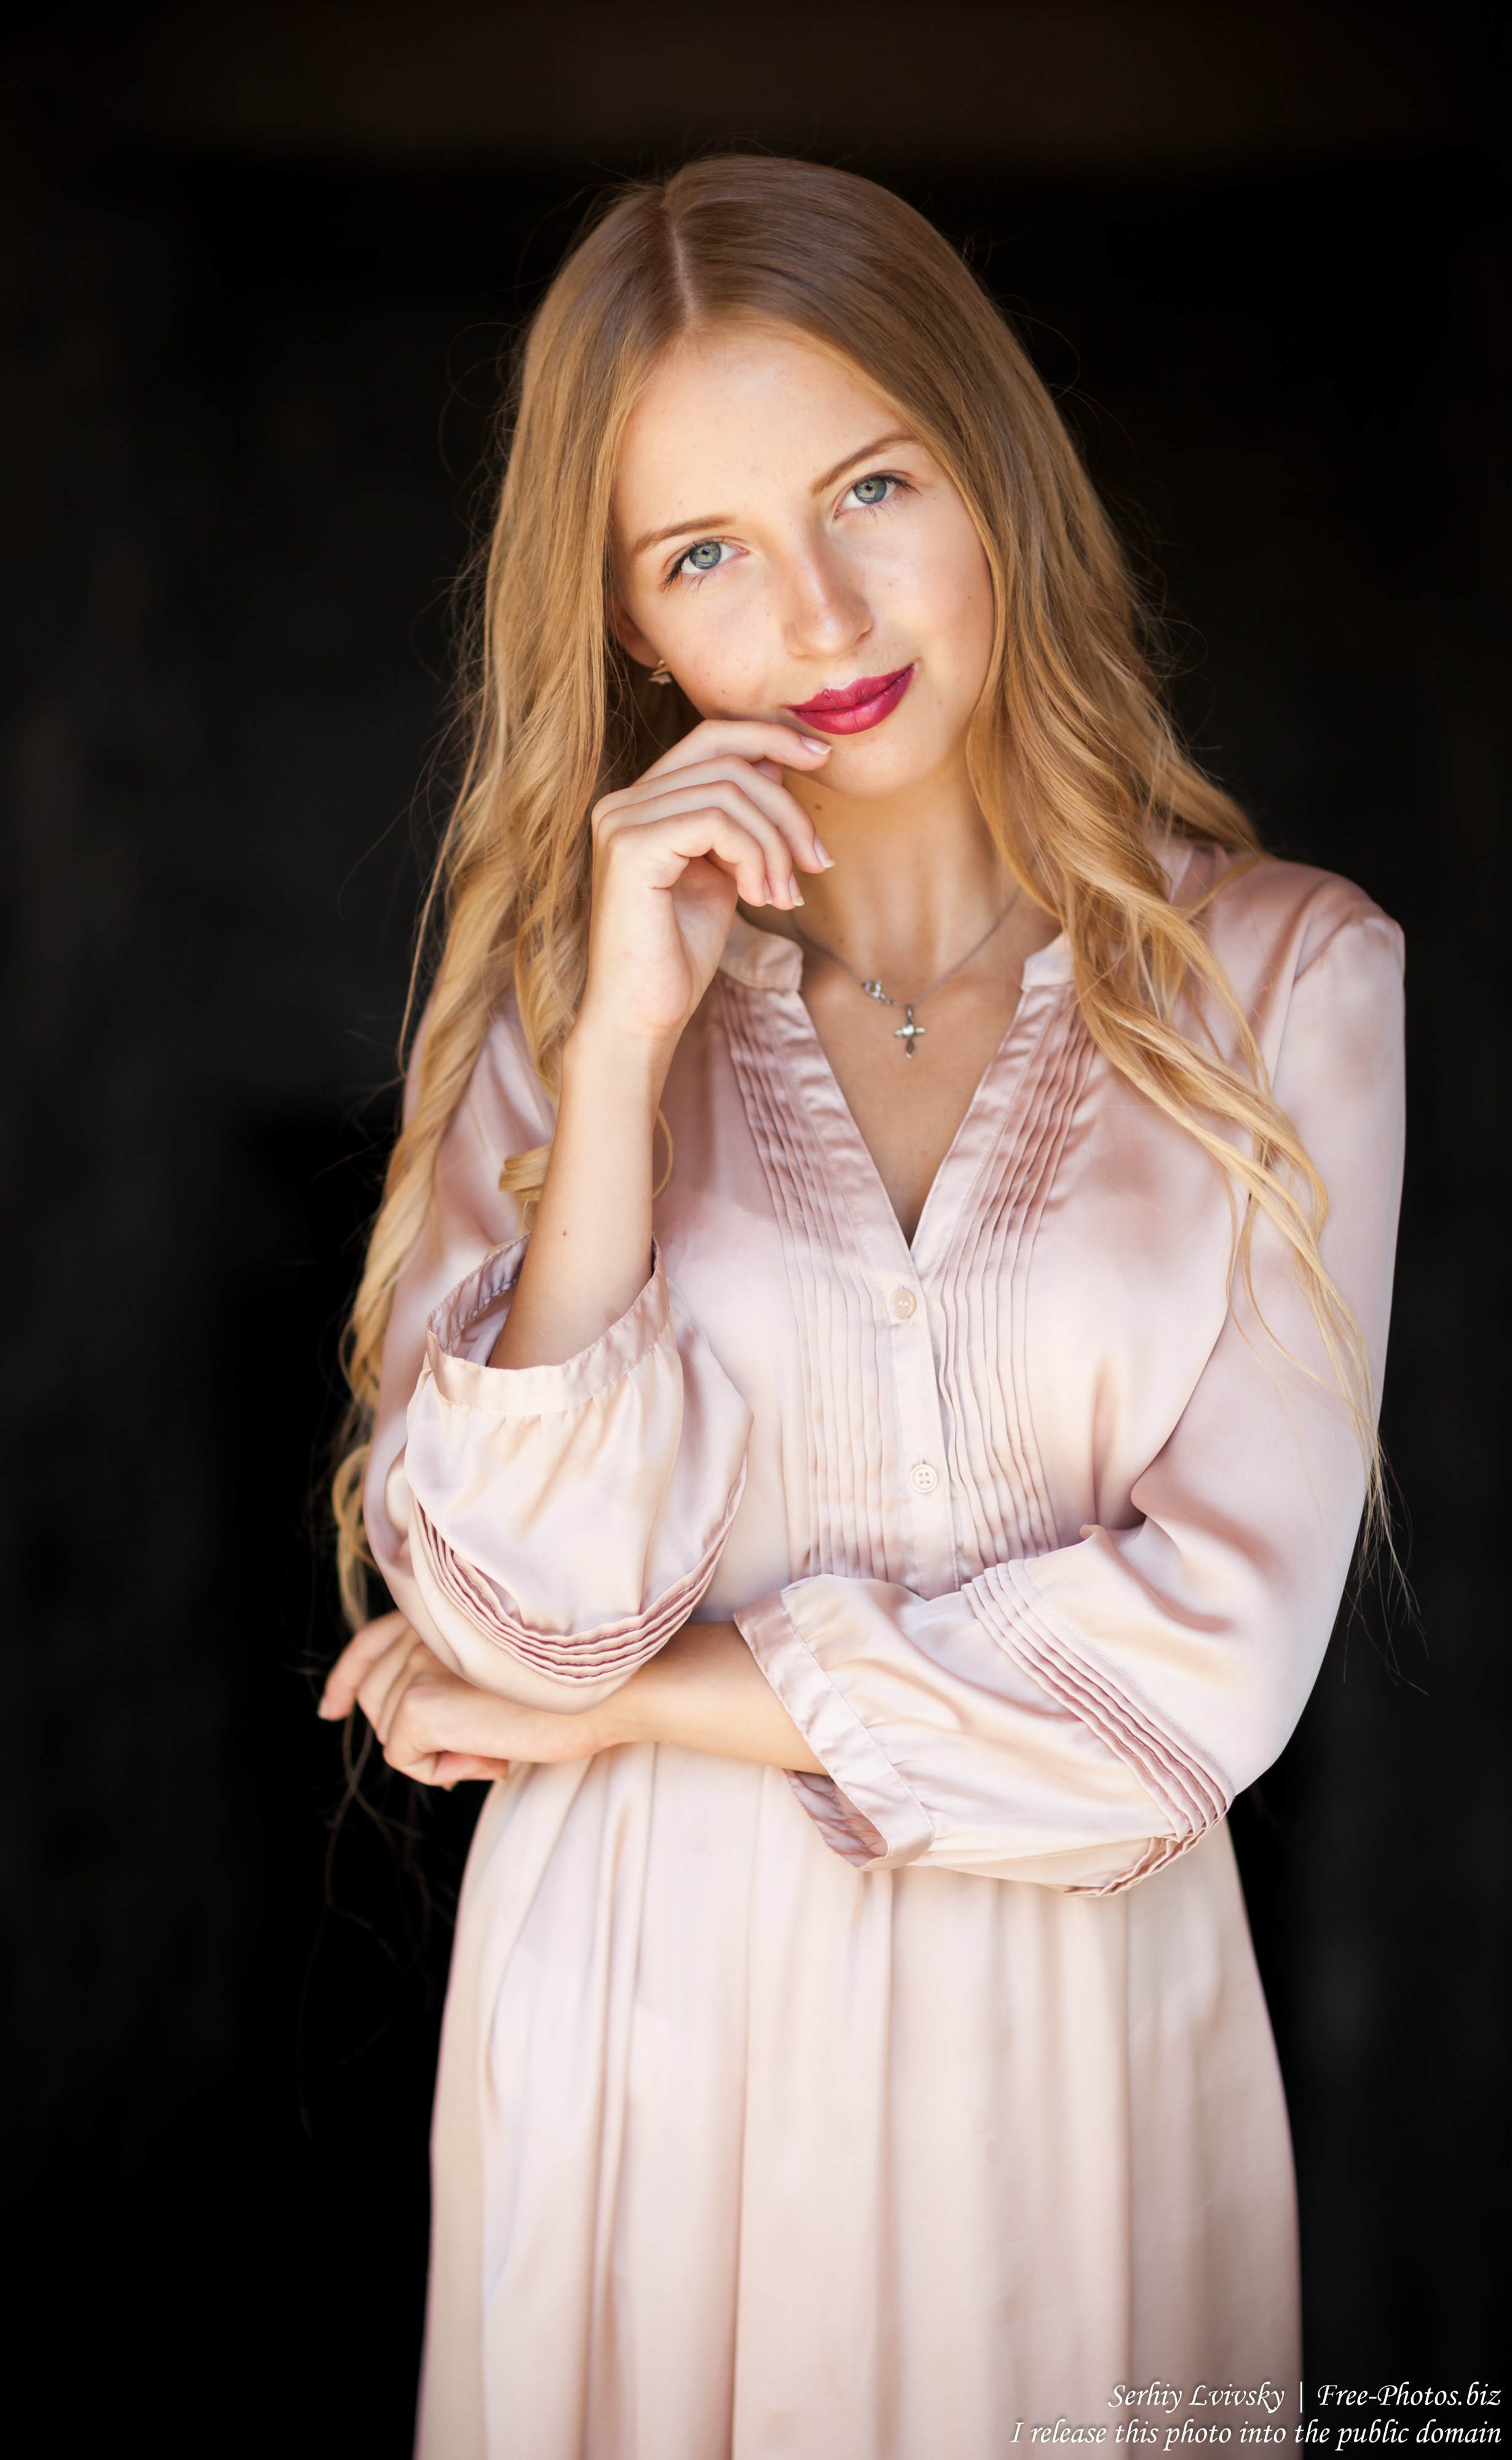 Ania - a 14-year-old natural blonde girl photographed by Serhiy Lvivsky in August 2017, picture 2